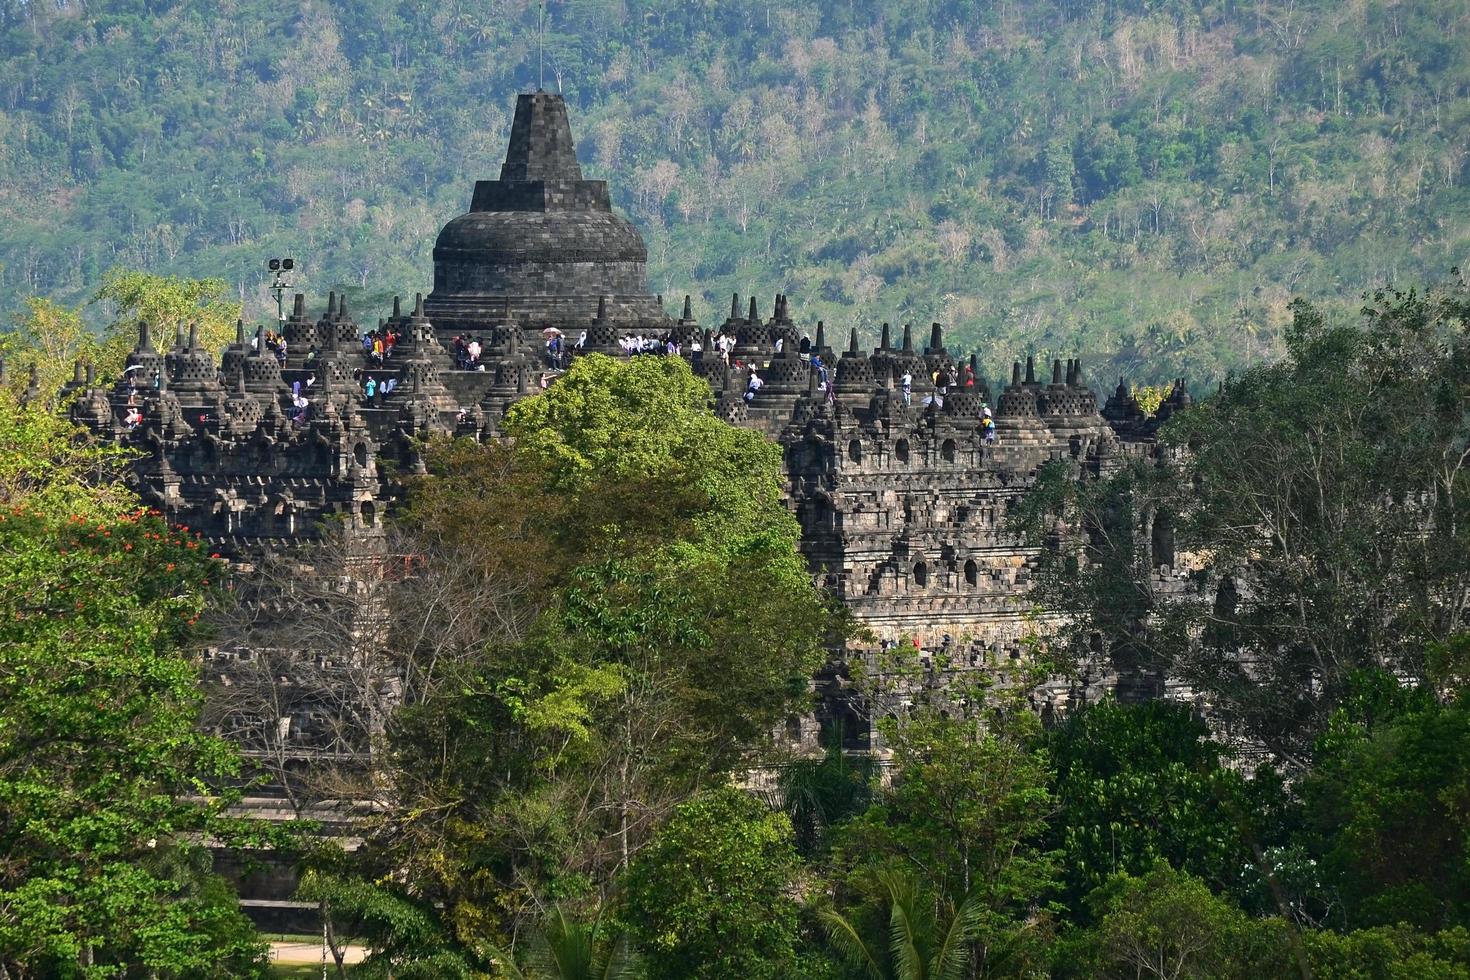 Magelang, Indonesia, 2013 - Borobudur is the largest Buddhist temple or temple in the world, as well as one of the largest Buddhist monuments in the world. photo